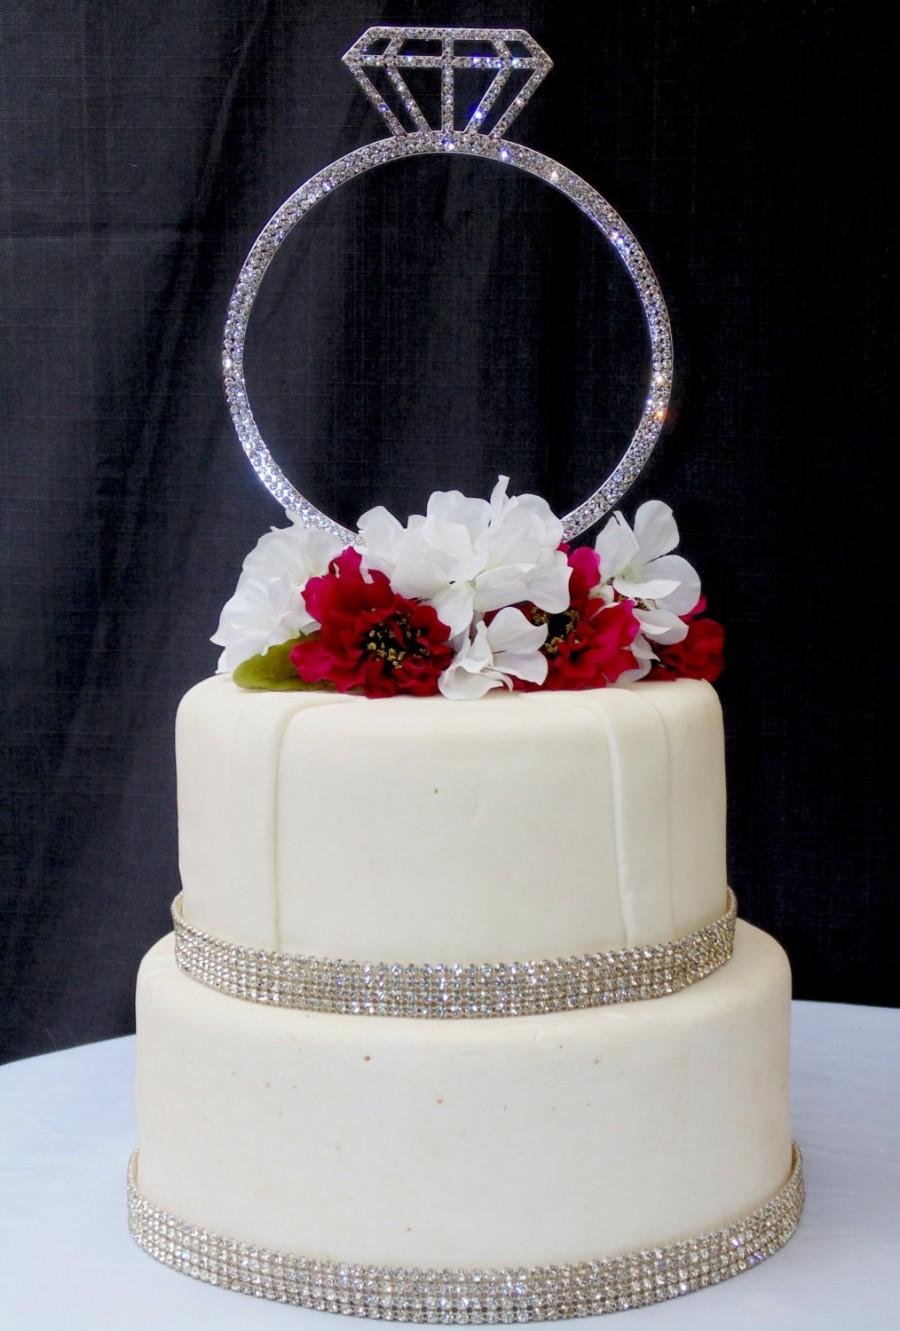 Wedding - Single Extravagant Large Silver Rhinestone Wedding Ring Cake Topper by Forbes Favors